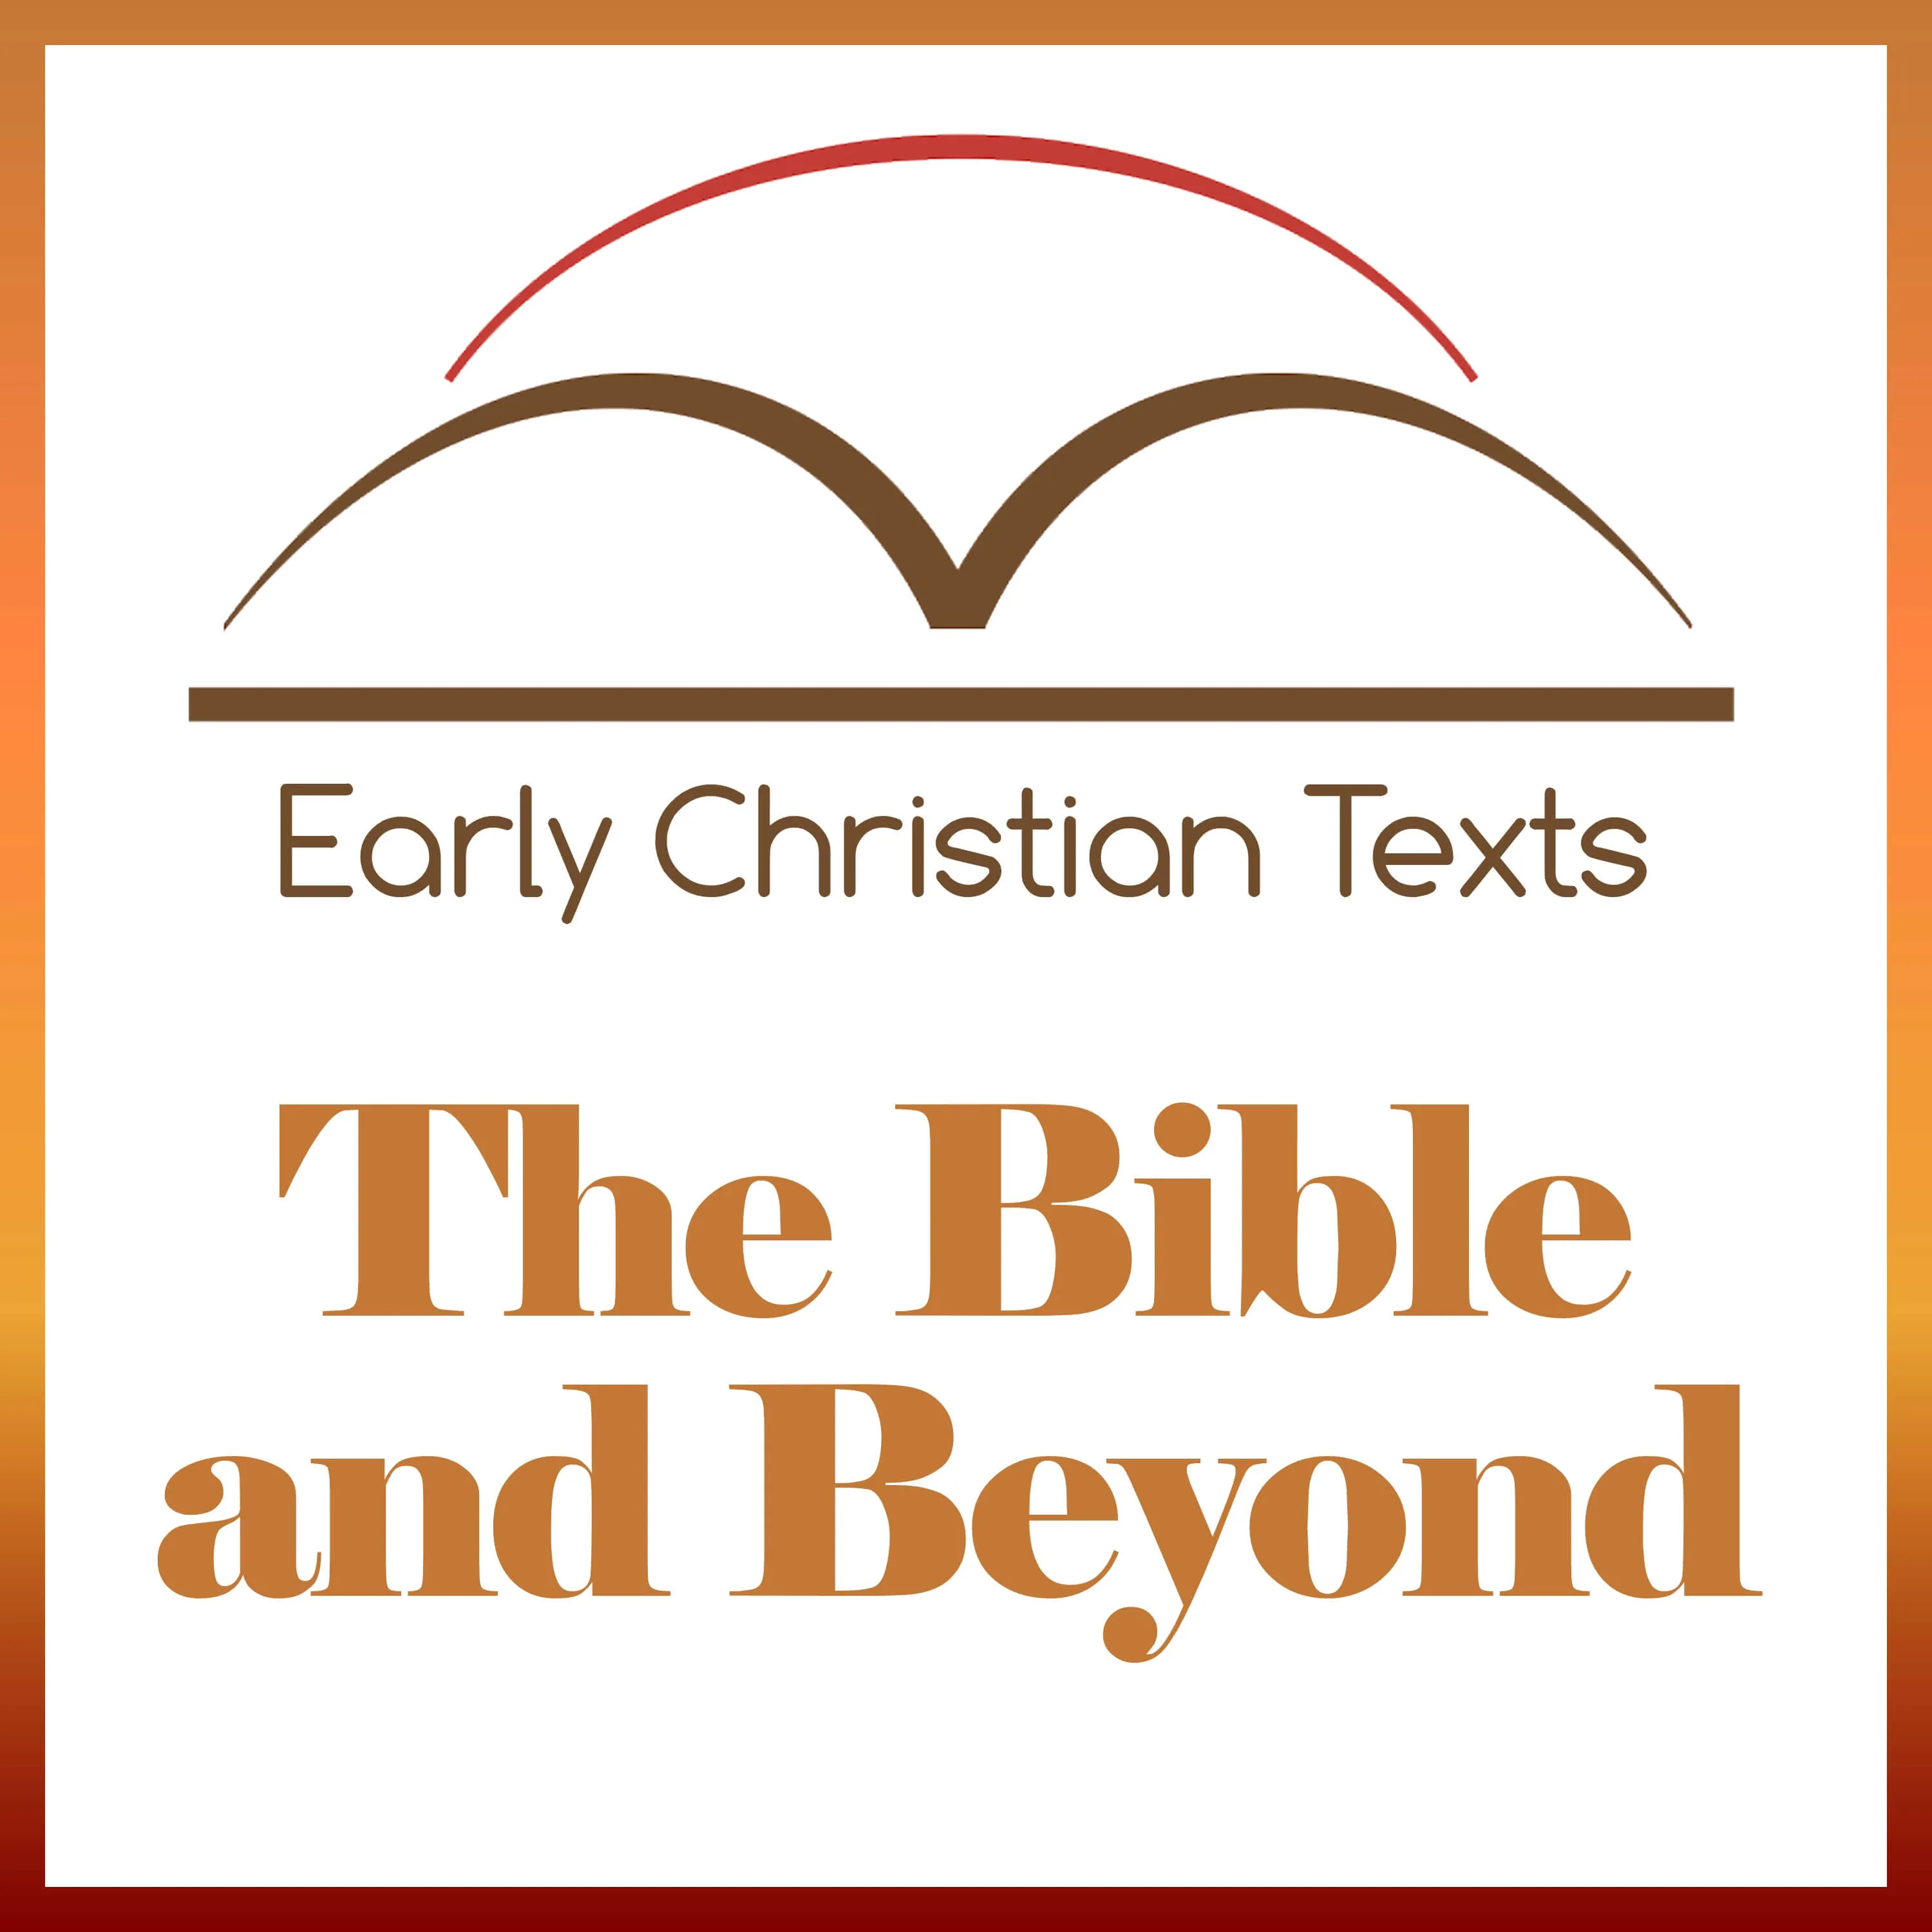 Early Christian Texts